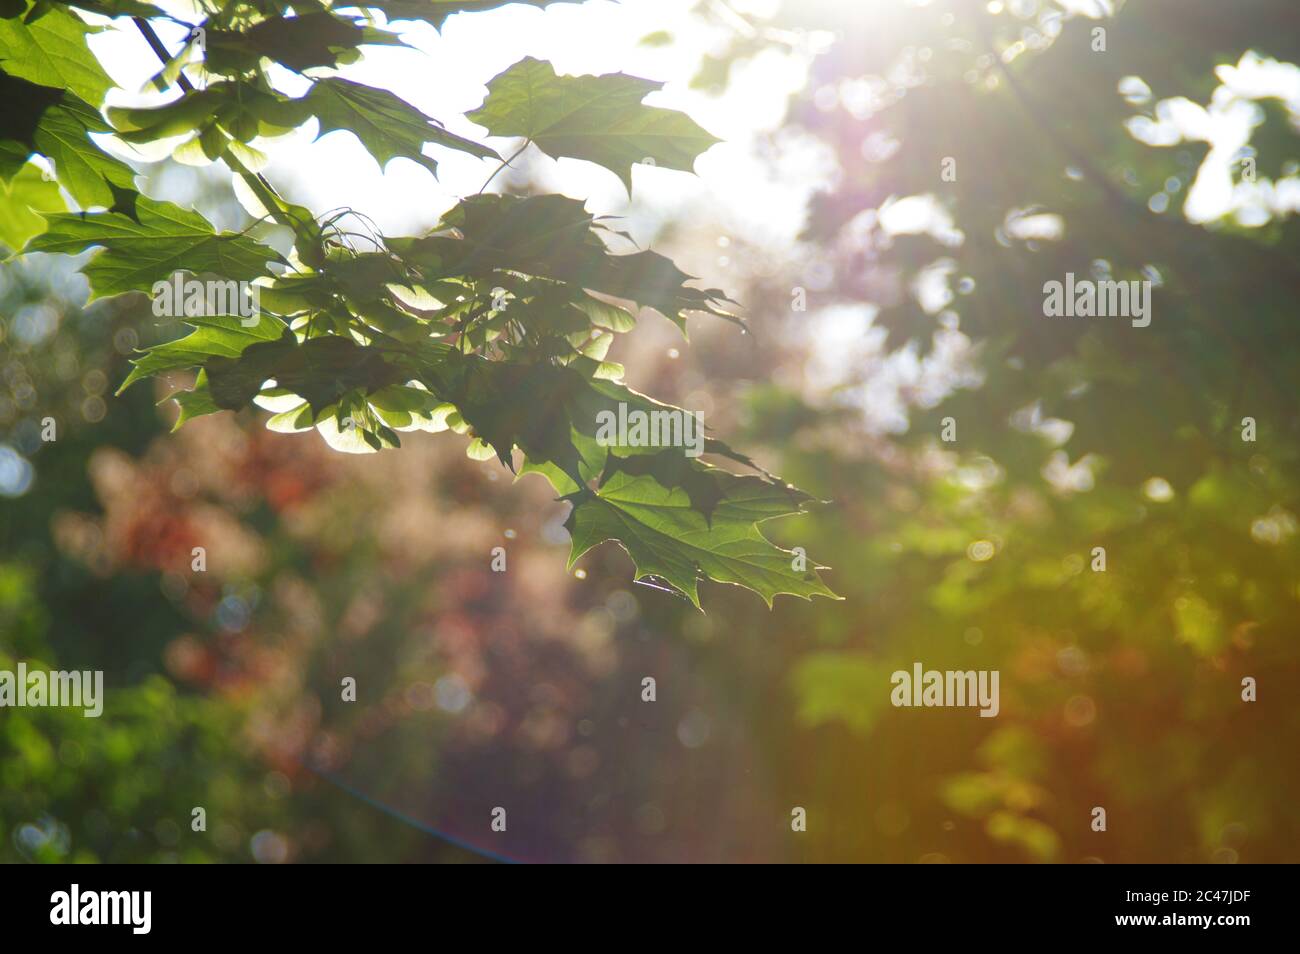 Tranquility concept. Calm scene in forest with sun in background. Sunbeams among leaves. Stock Photo